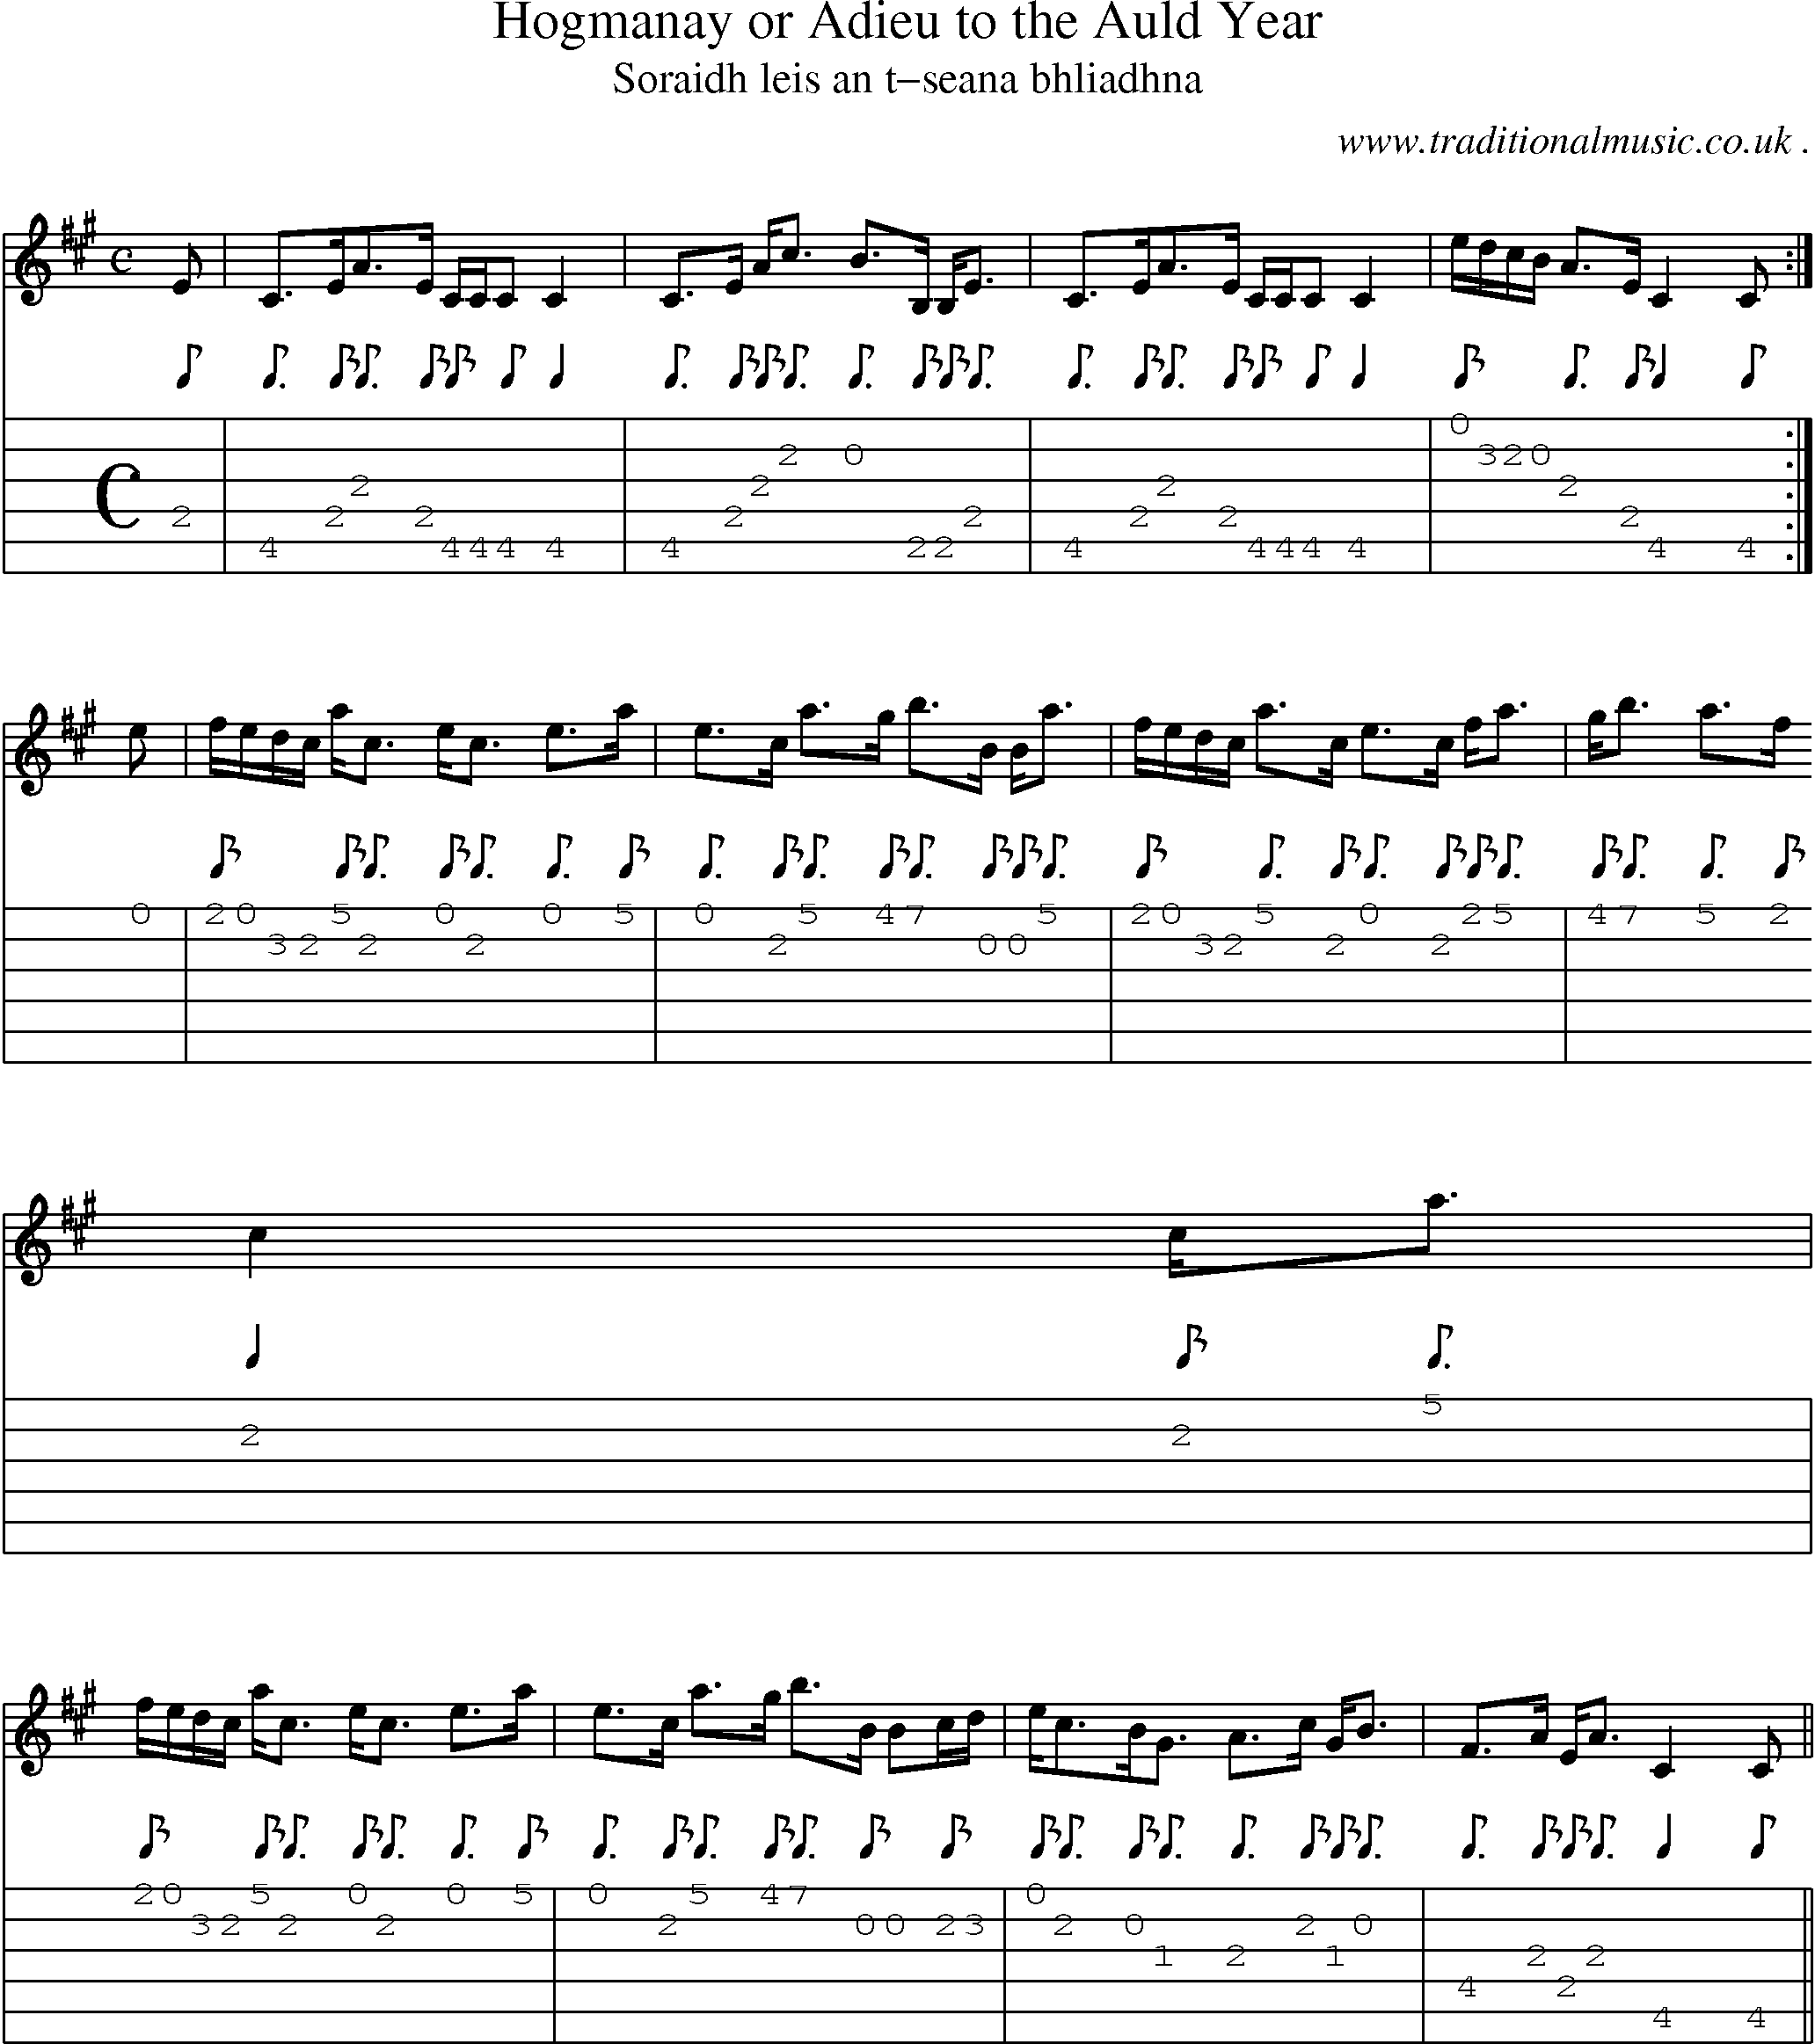 Sheet-music  score, Chords and Guitar Tabs for Hogmanay Or Adieu To The Auld Year